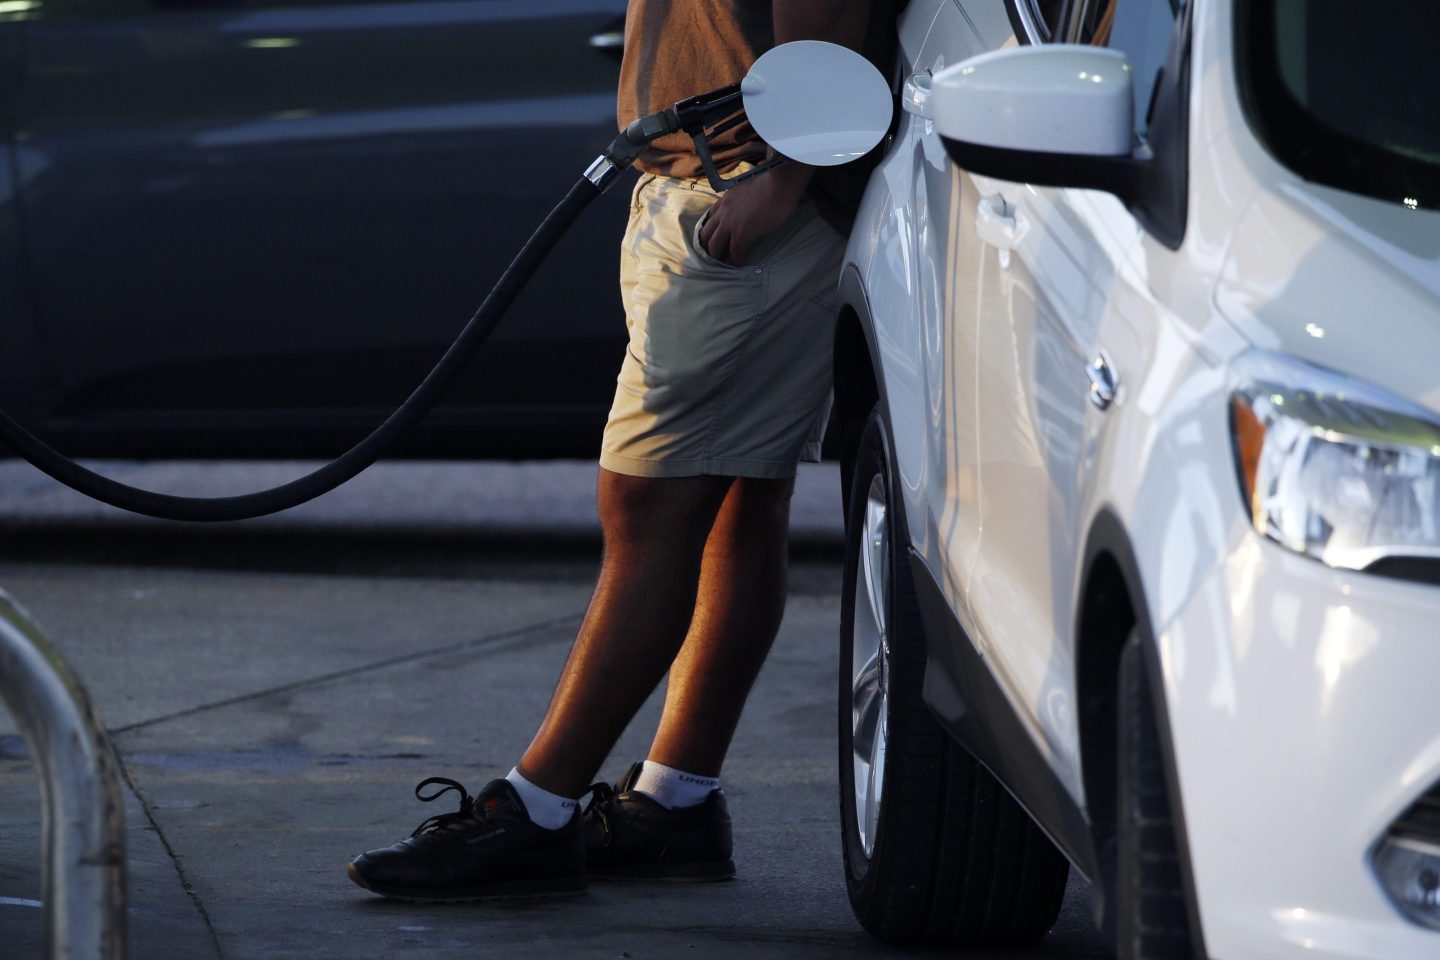 A customer refuels a vehicle at a Thornton's Inc. gas station in New Albany, Indiana, U.S., on Thursday, June 27, 2019. The national average for unleaded fuel is $2.72 a gallon, down 15 cents from last year's Fourth of July holiday. The lower prices are motivating a record number to hit the road, with 41.4 million commuters expected to travel by automobile, according to AAA. Photographer: Luke Sharrett/Bloomberg via Getty Images